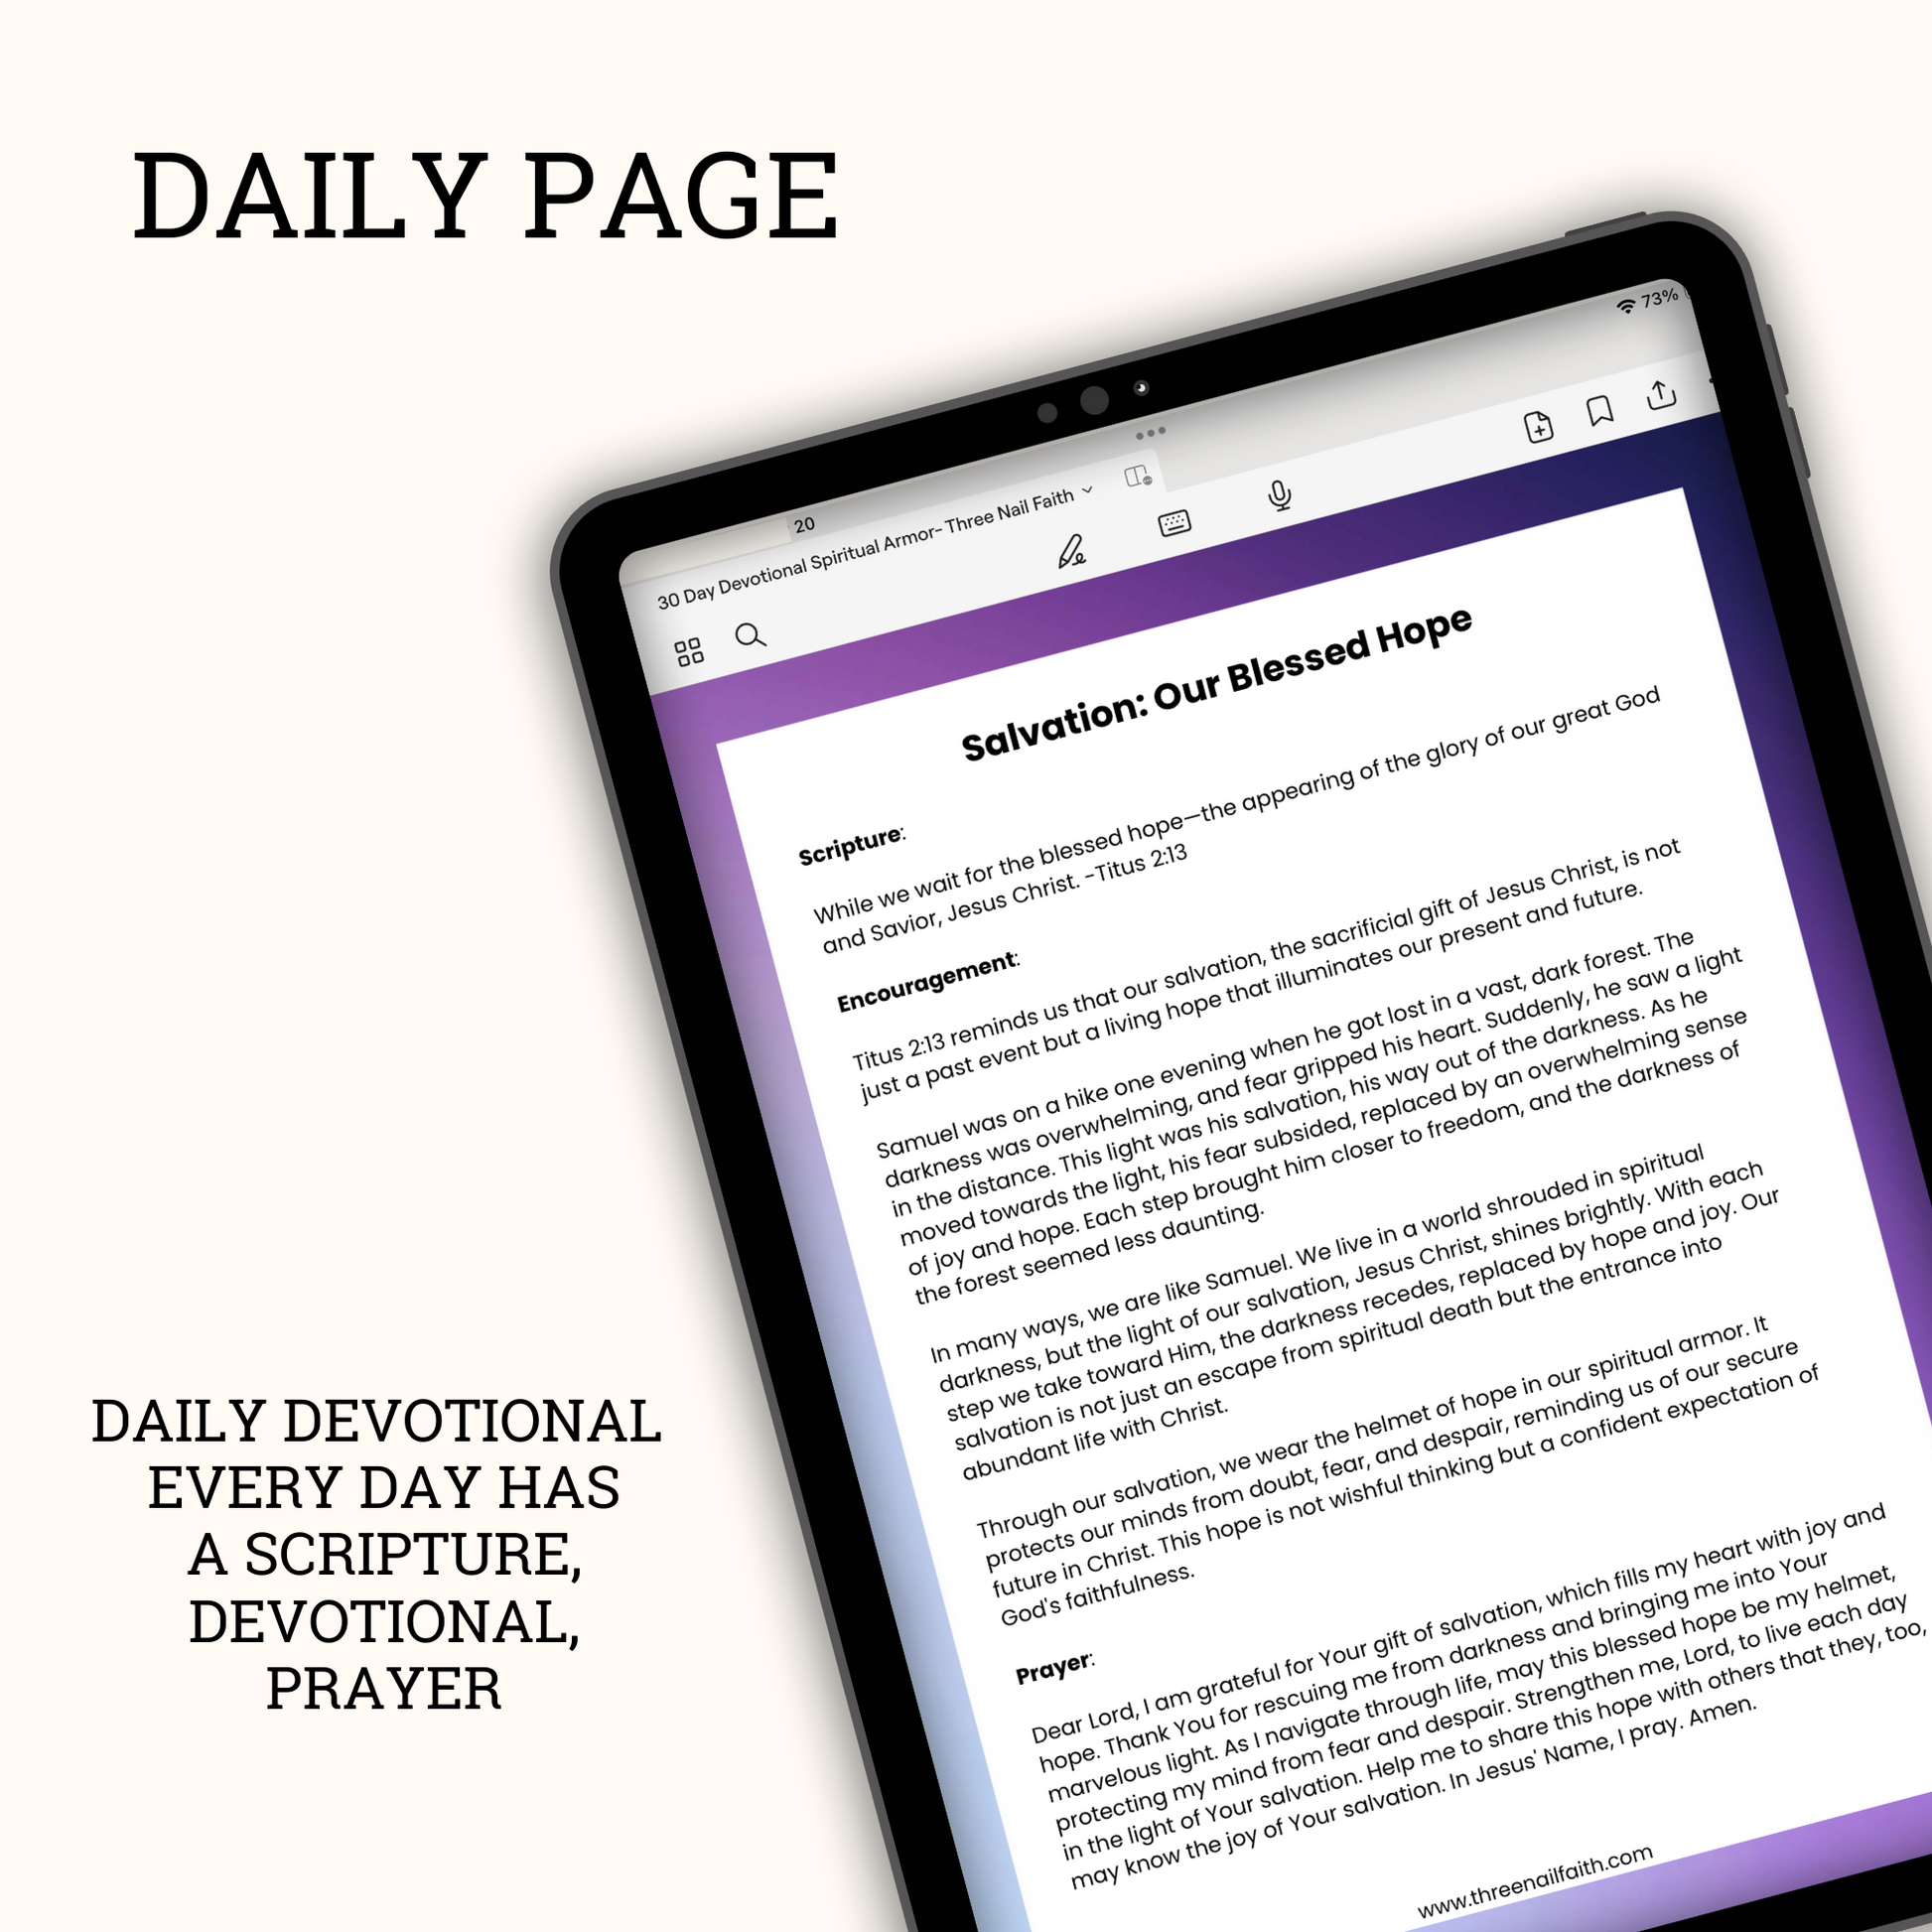 daily page of devotional. each page has a scripture, devotional, and prayer